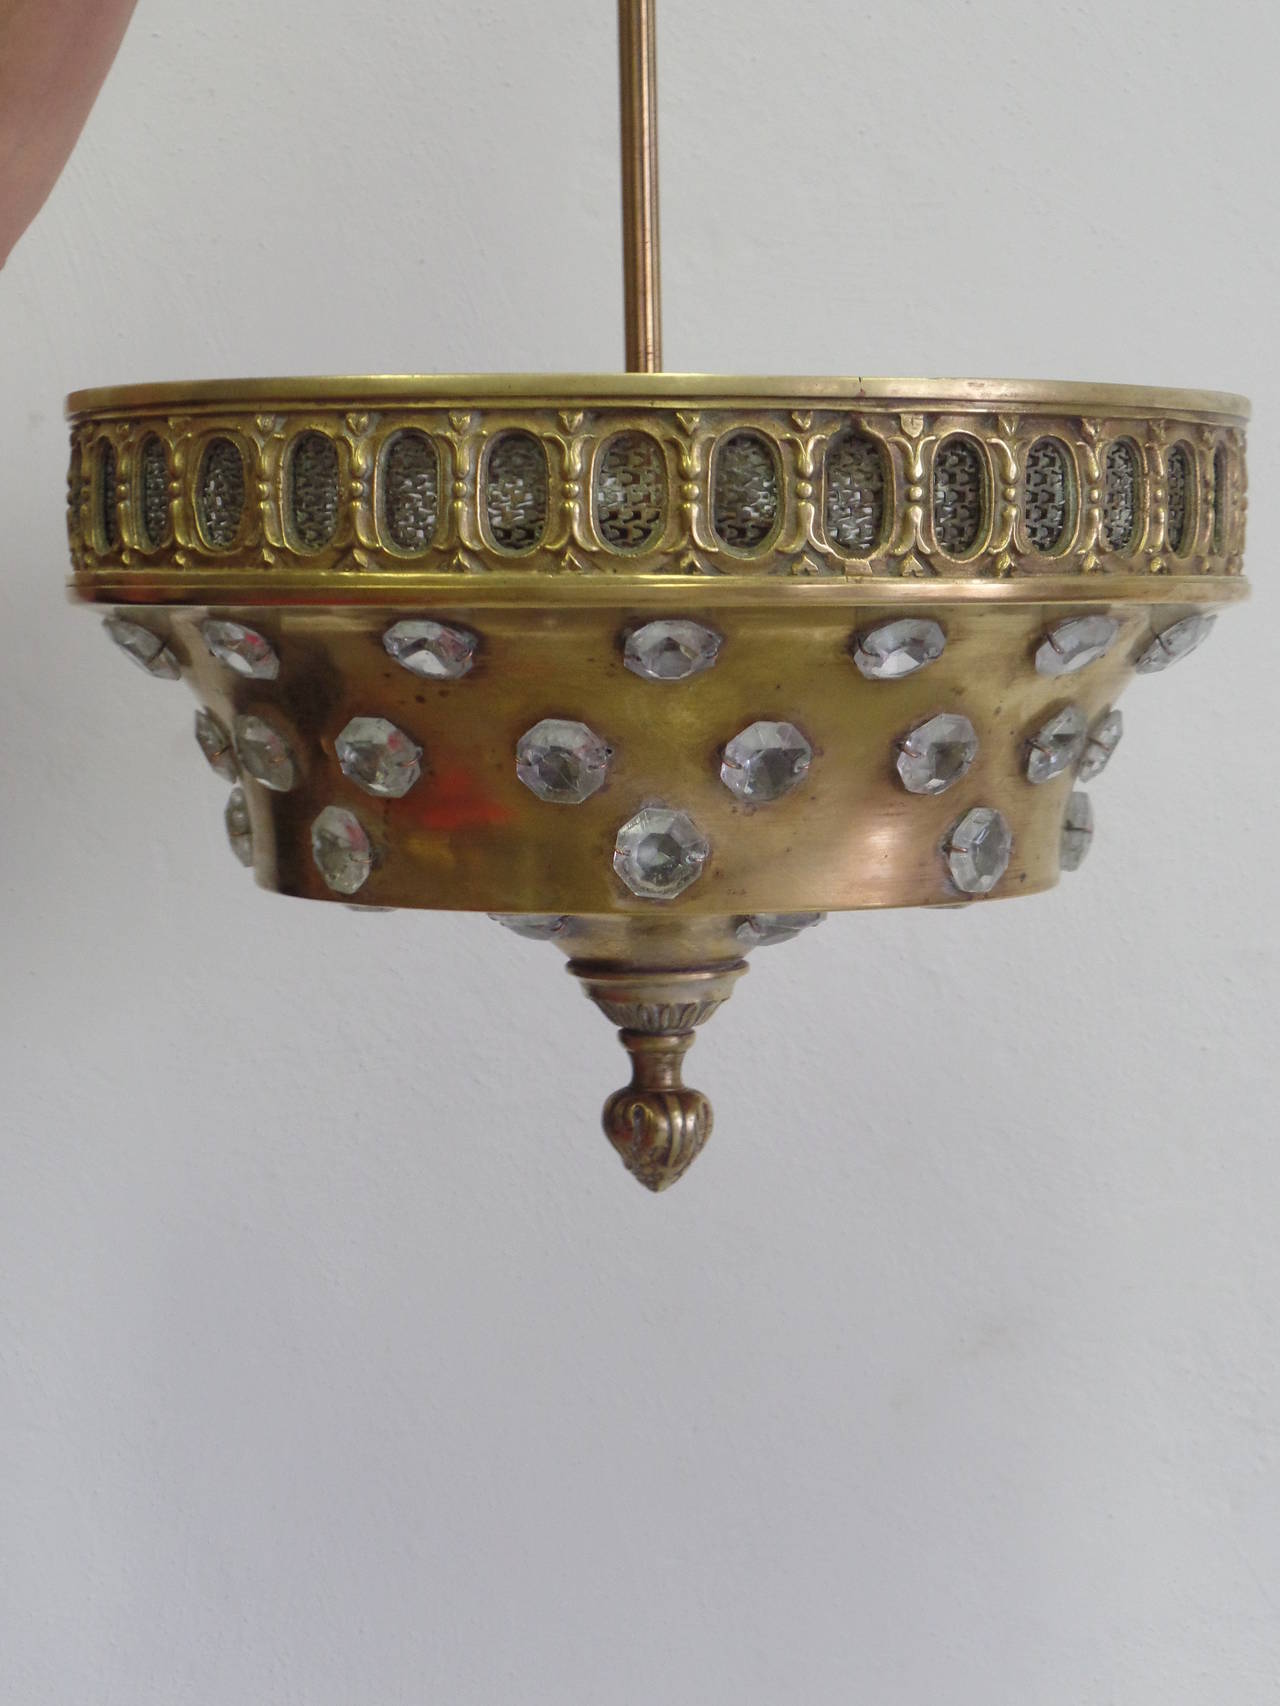 Elegant French Mid-Century gilt bronze light in the Modern Neoclassical taste with imbedded cut crystal by Maison Jansen that can be hung as a pendant or as a flush mount fixture. 

Fixture alone without stem is D 12